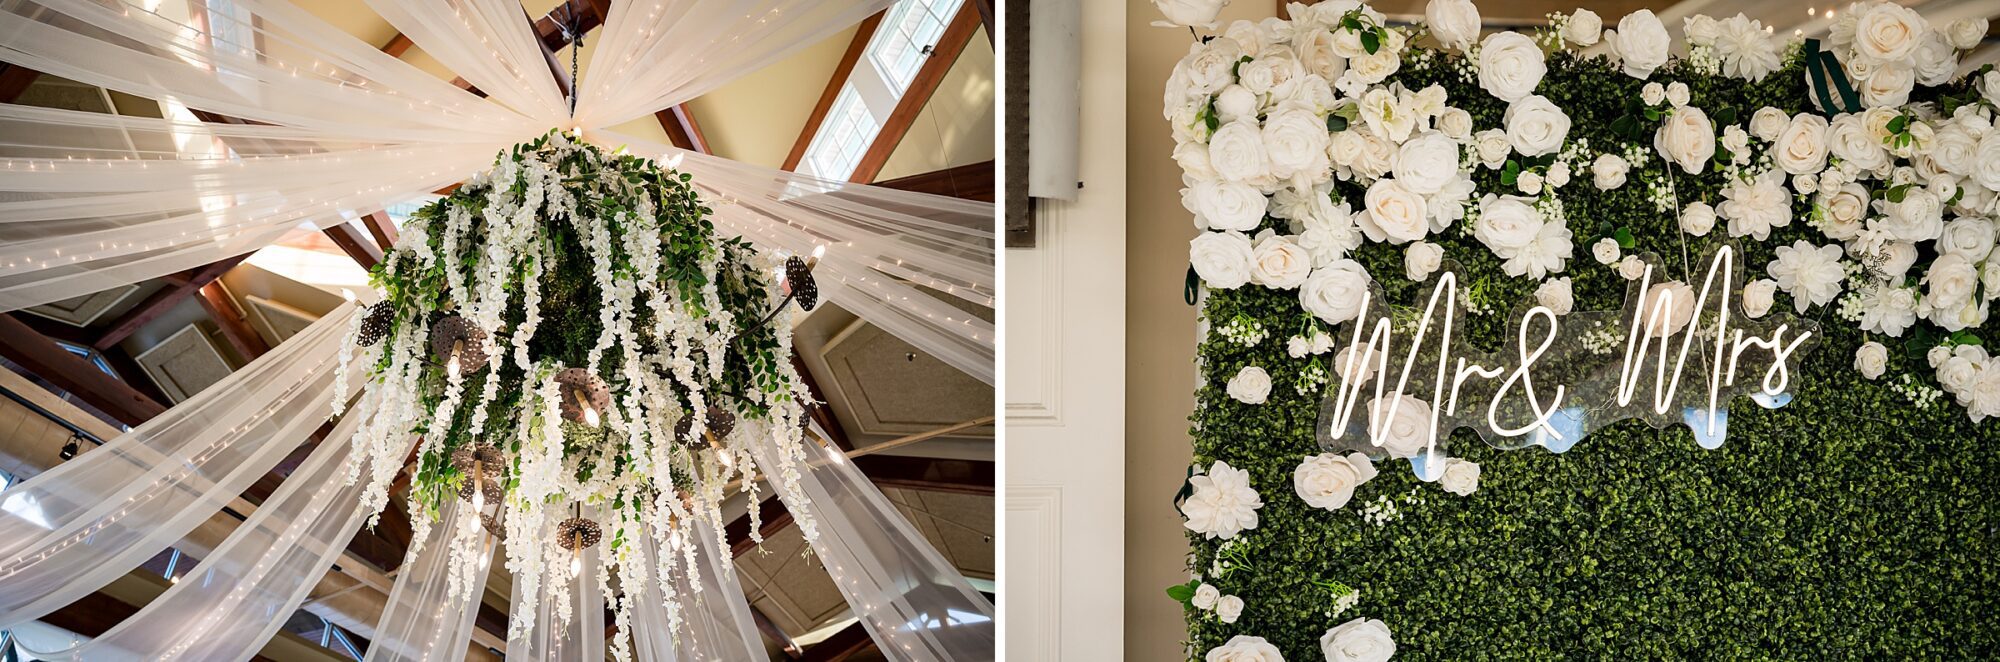 Two pictures of a wedding with white flowers hanging from the ceiling.